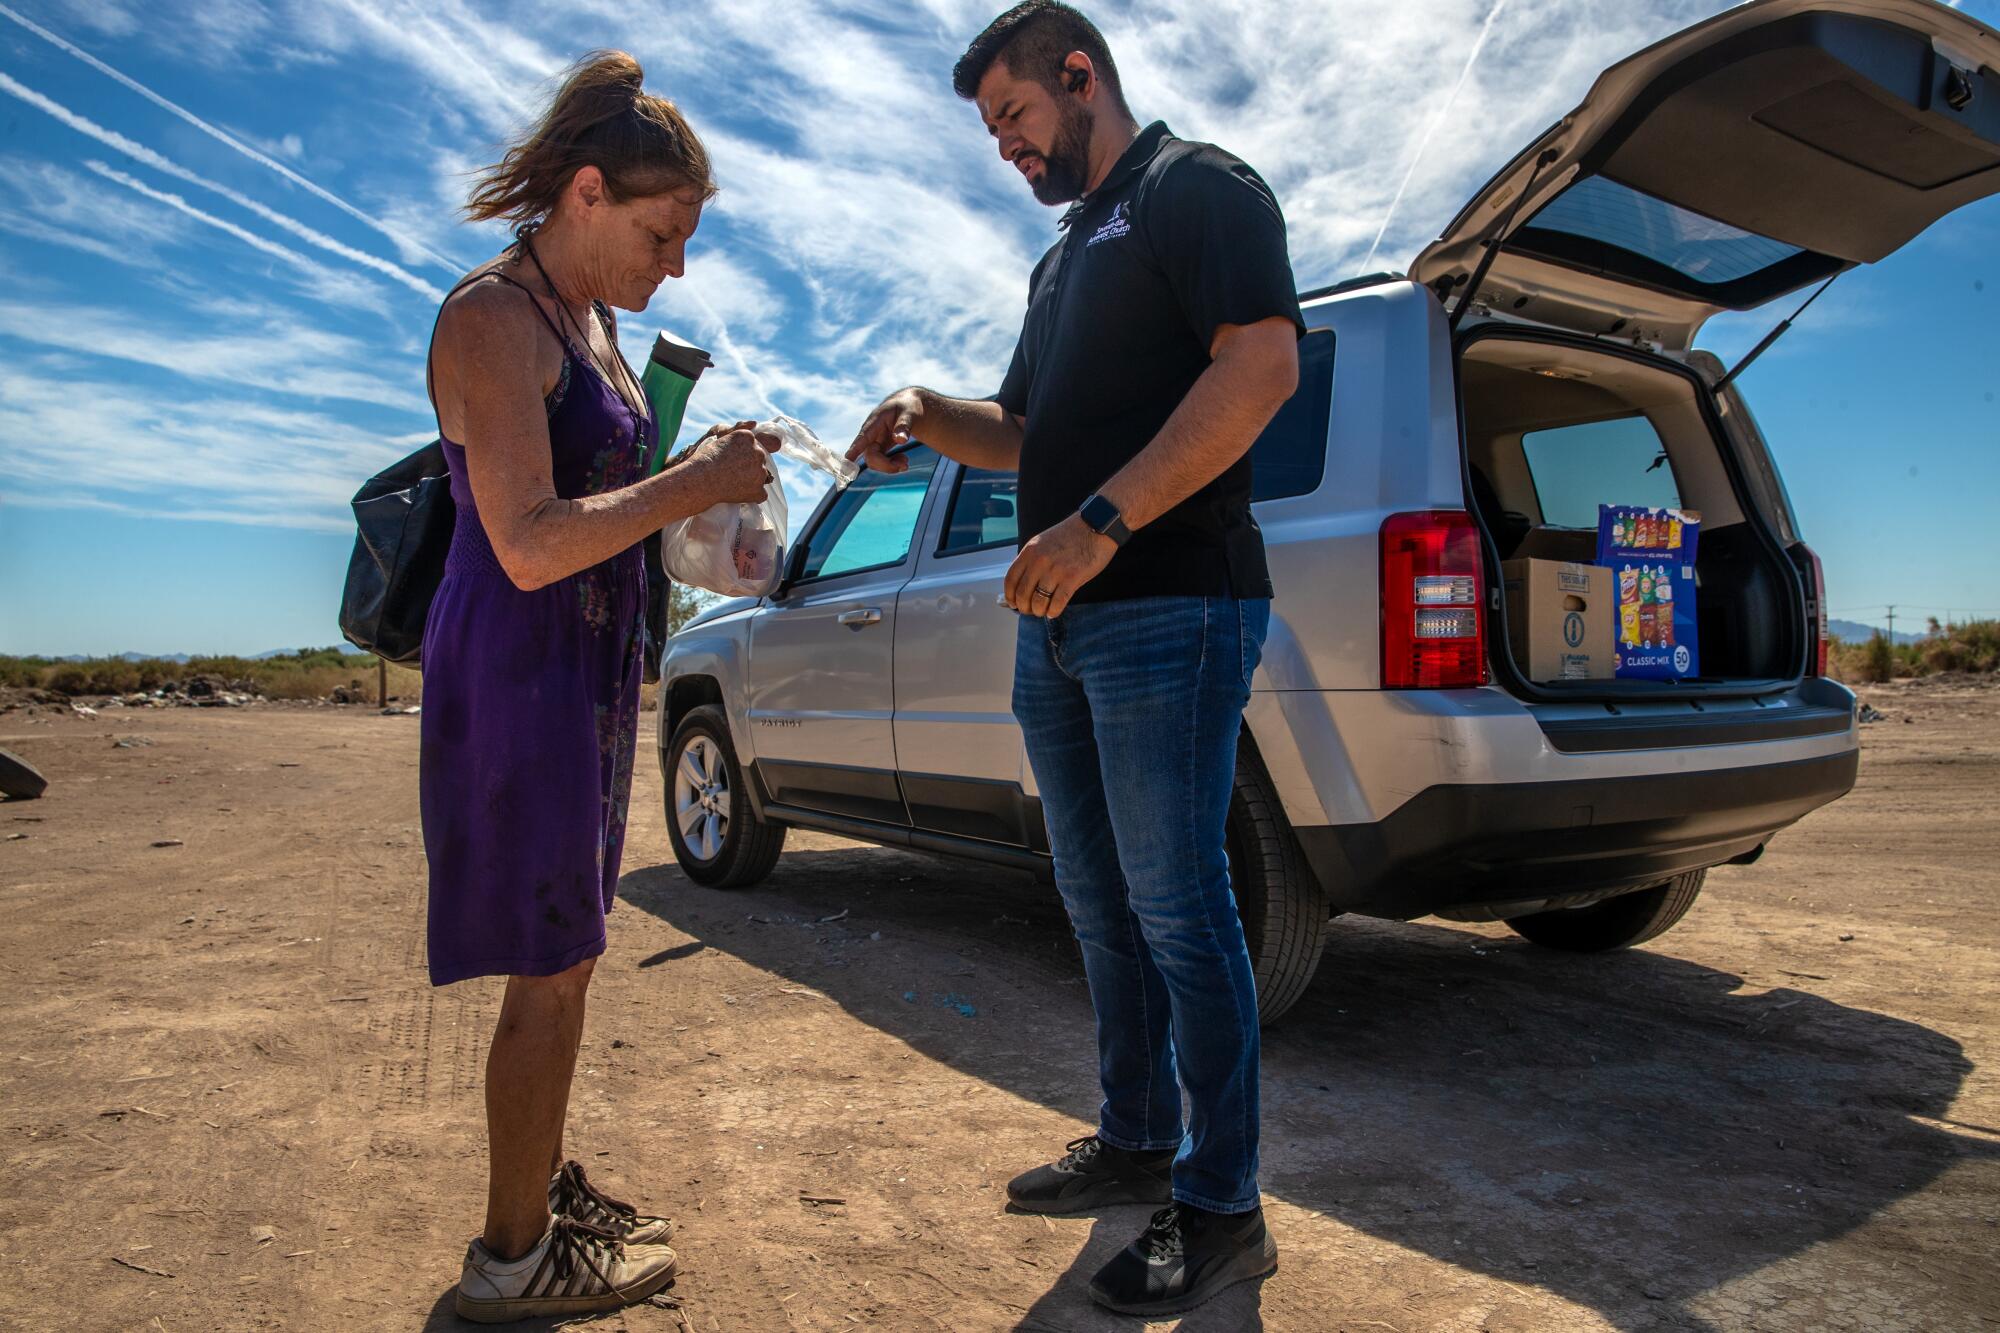 A man gives food to a woman on a very hot day in Blythe.